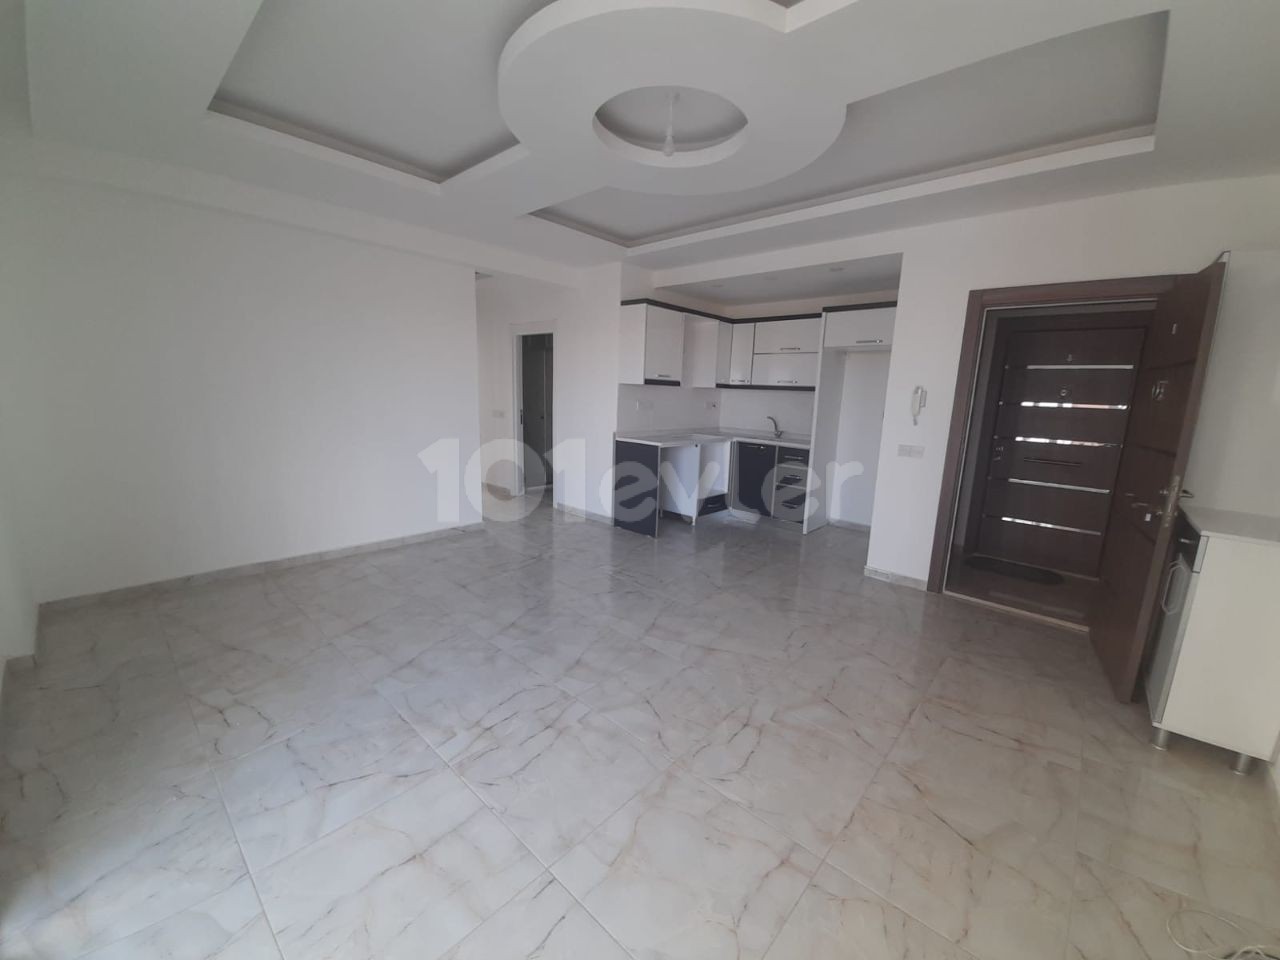 2+1 flats for sale in iskele long beach unfurnished flats 85 square meters 130.000 STG QUALITY WORKMANSHIP WALKING DISTANCE TO THE SEA. FLAT IS ON THE 1st FLOOR.